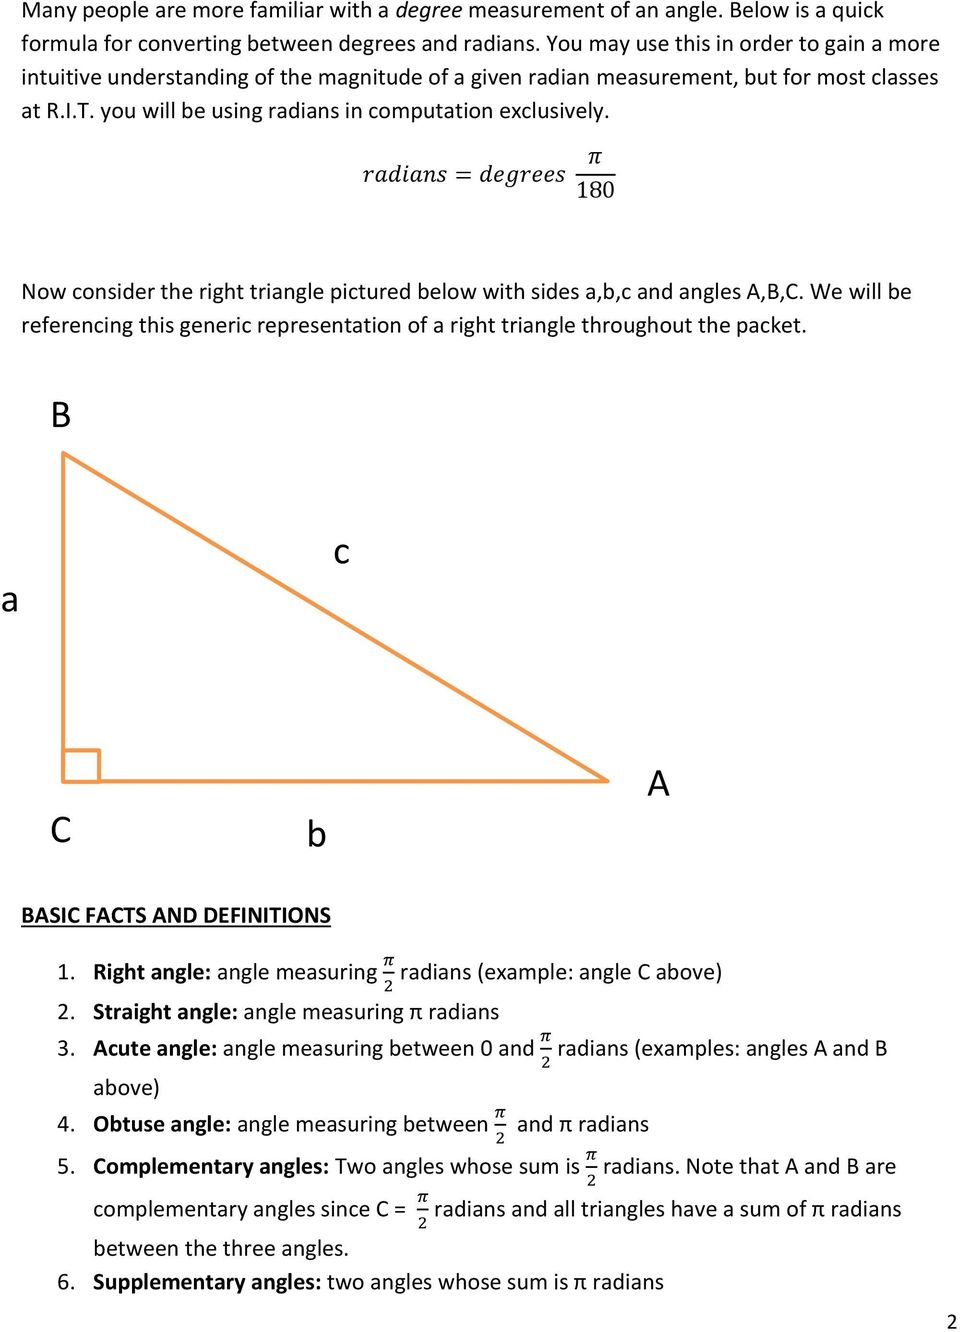 radians = degrees π 180 Now consider the right triangle pictured below with sides a,b,c and angles A,B,C. We will be referencing this generic representation of a right triangle throughout the packet.